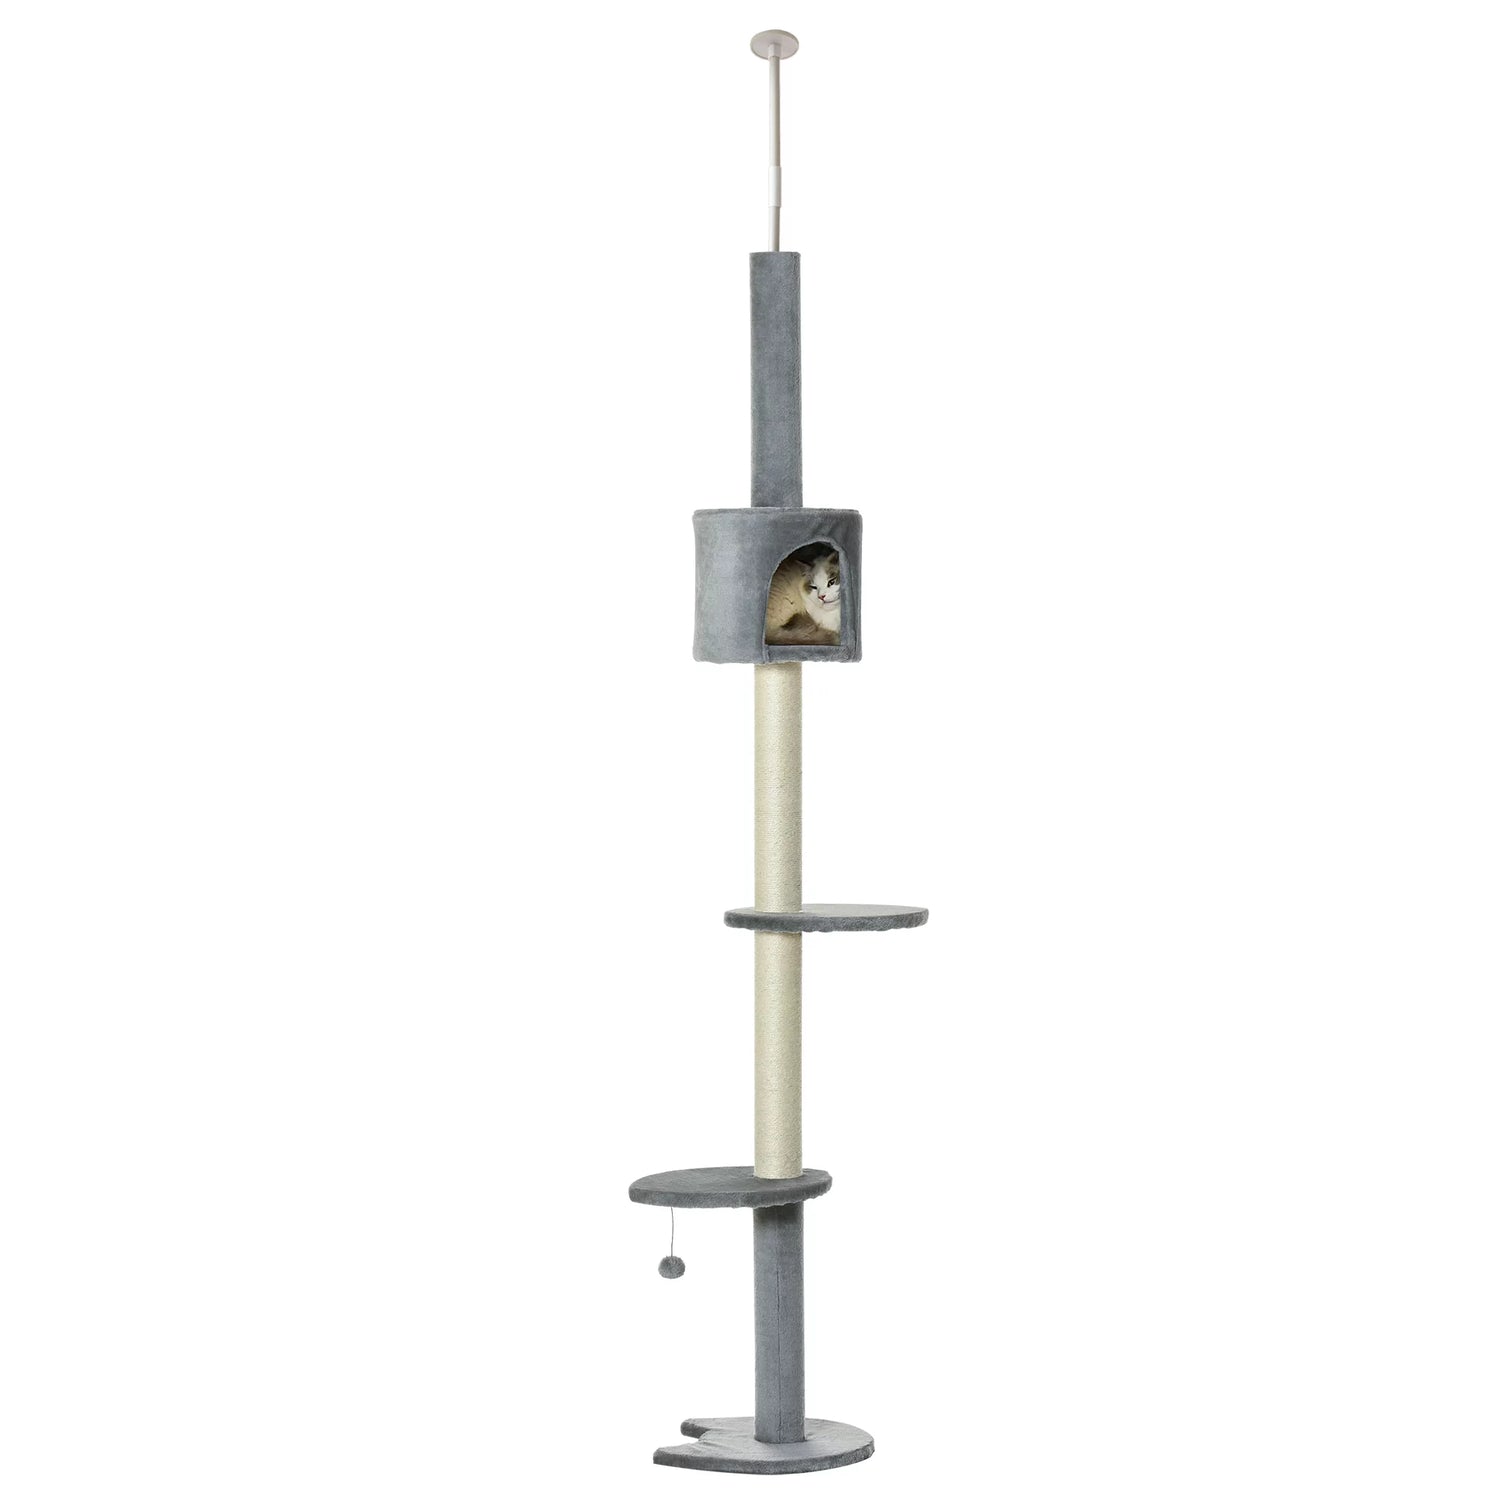 Pawhut 110" Cat Tree Height Adjustable Floor-To-Ceiling 4-Tier Kitty Climbing Activity Center Condo Cat Toy with Scratching Post Hanging Balls Play Rest Post Pet Furniture Grey